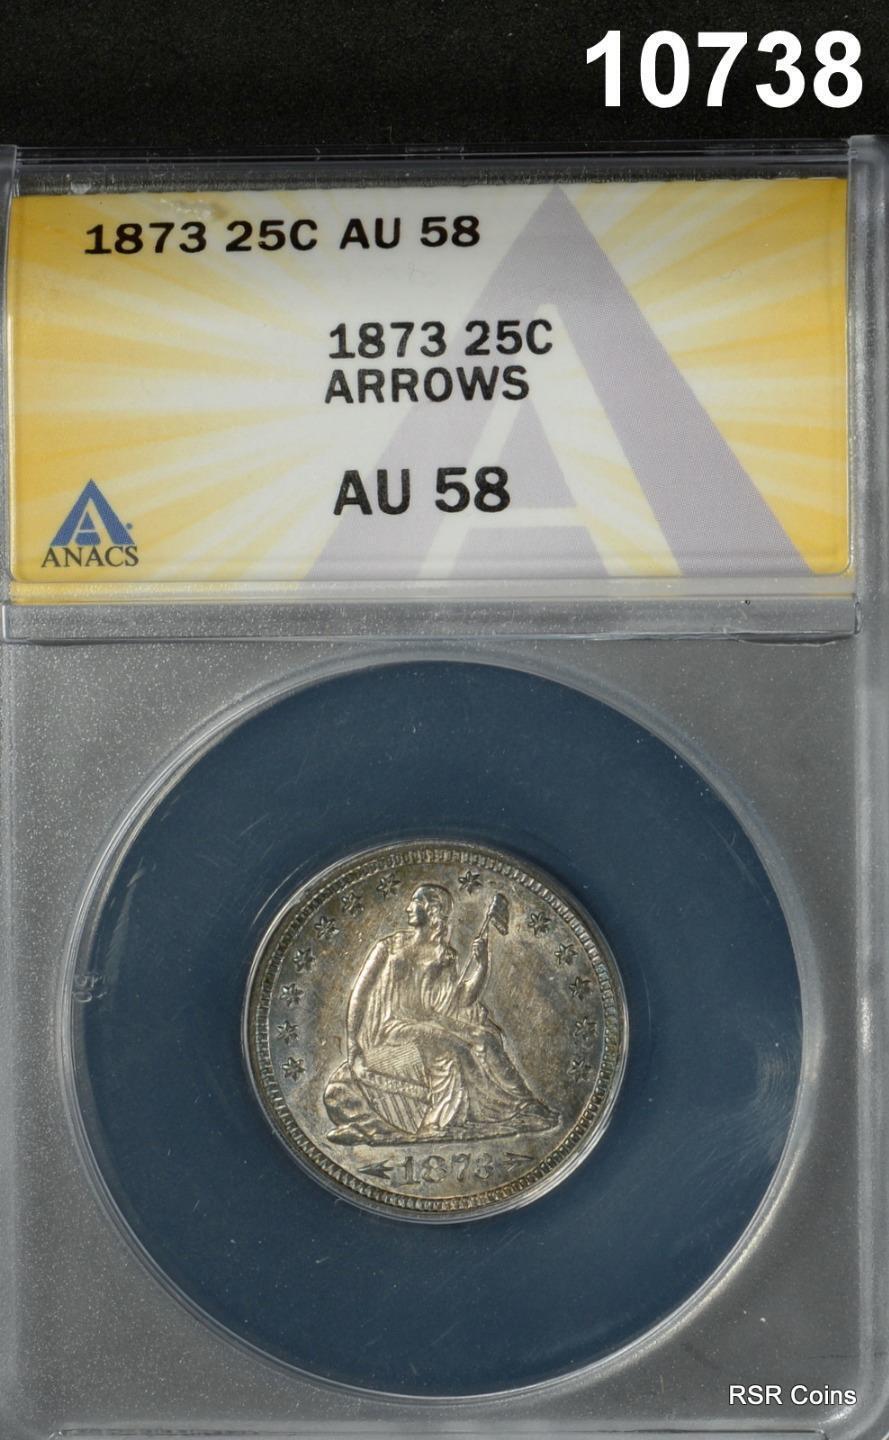 1873 SEATED LIBERTY QUARTER ANACS CERTIFIED AU58 TOUCH OF BLUE! #10738